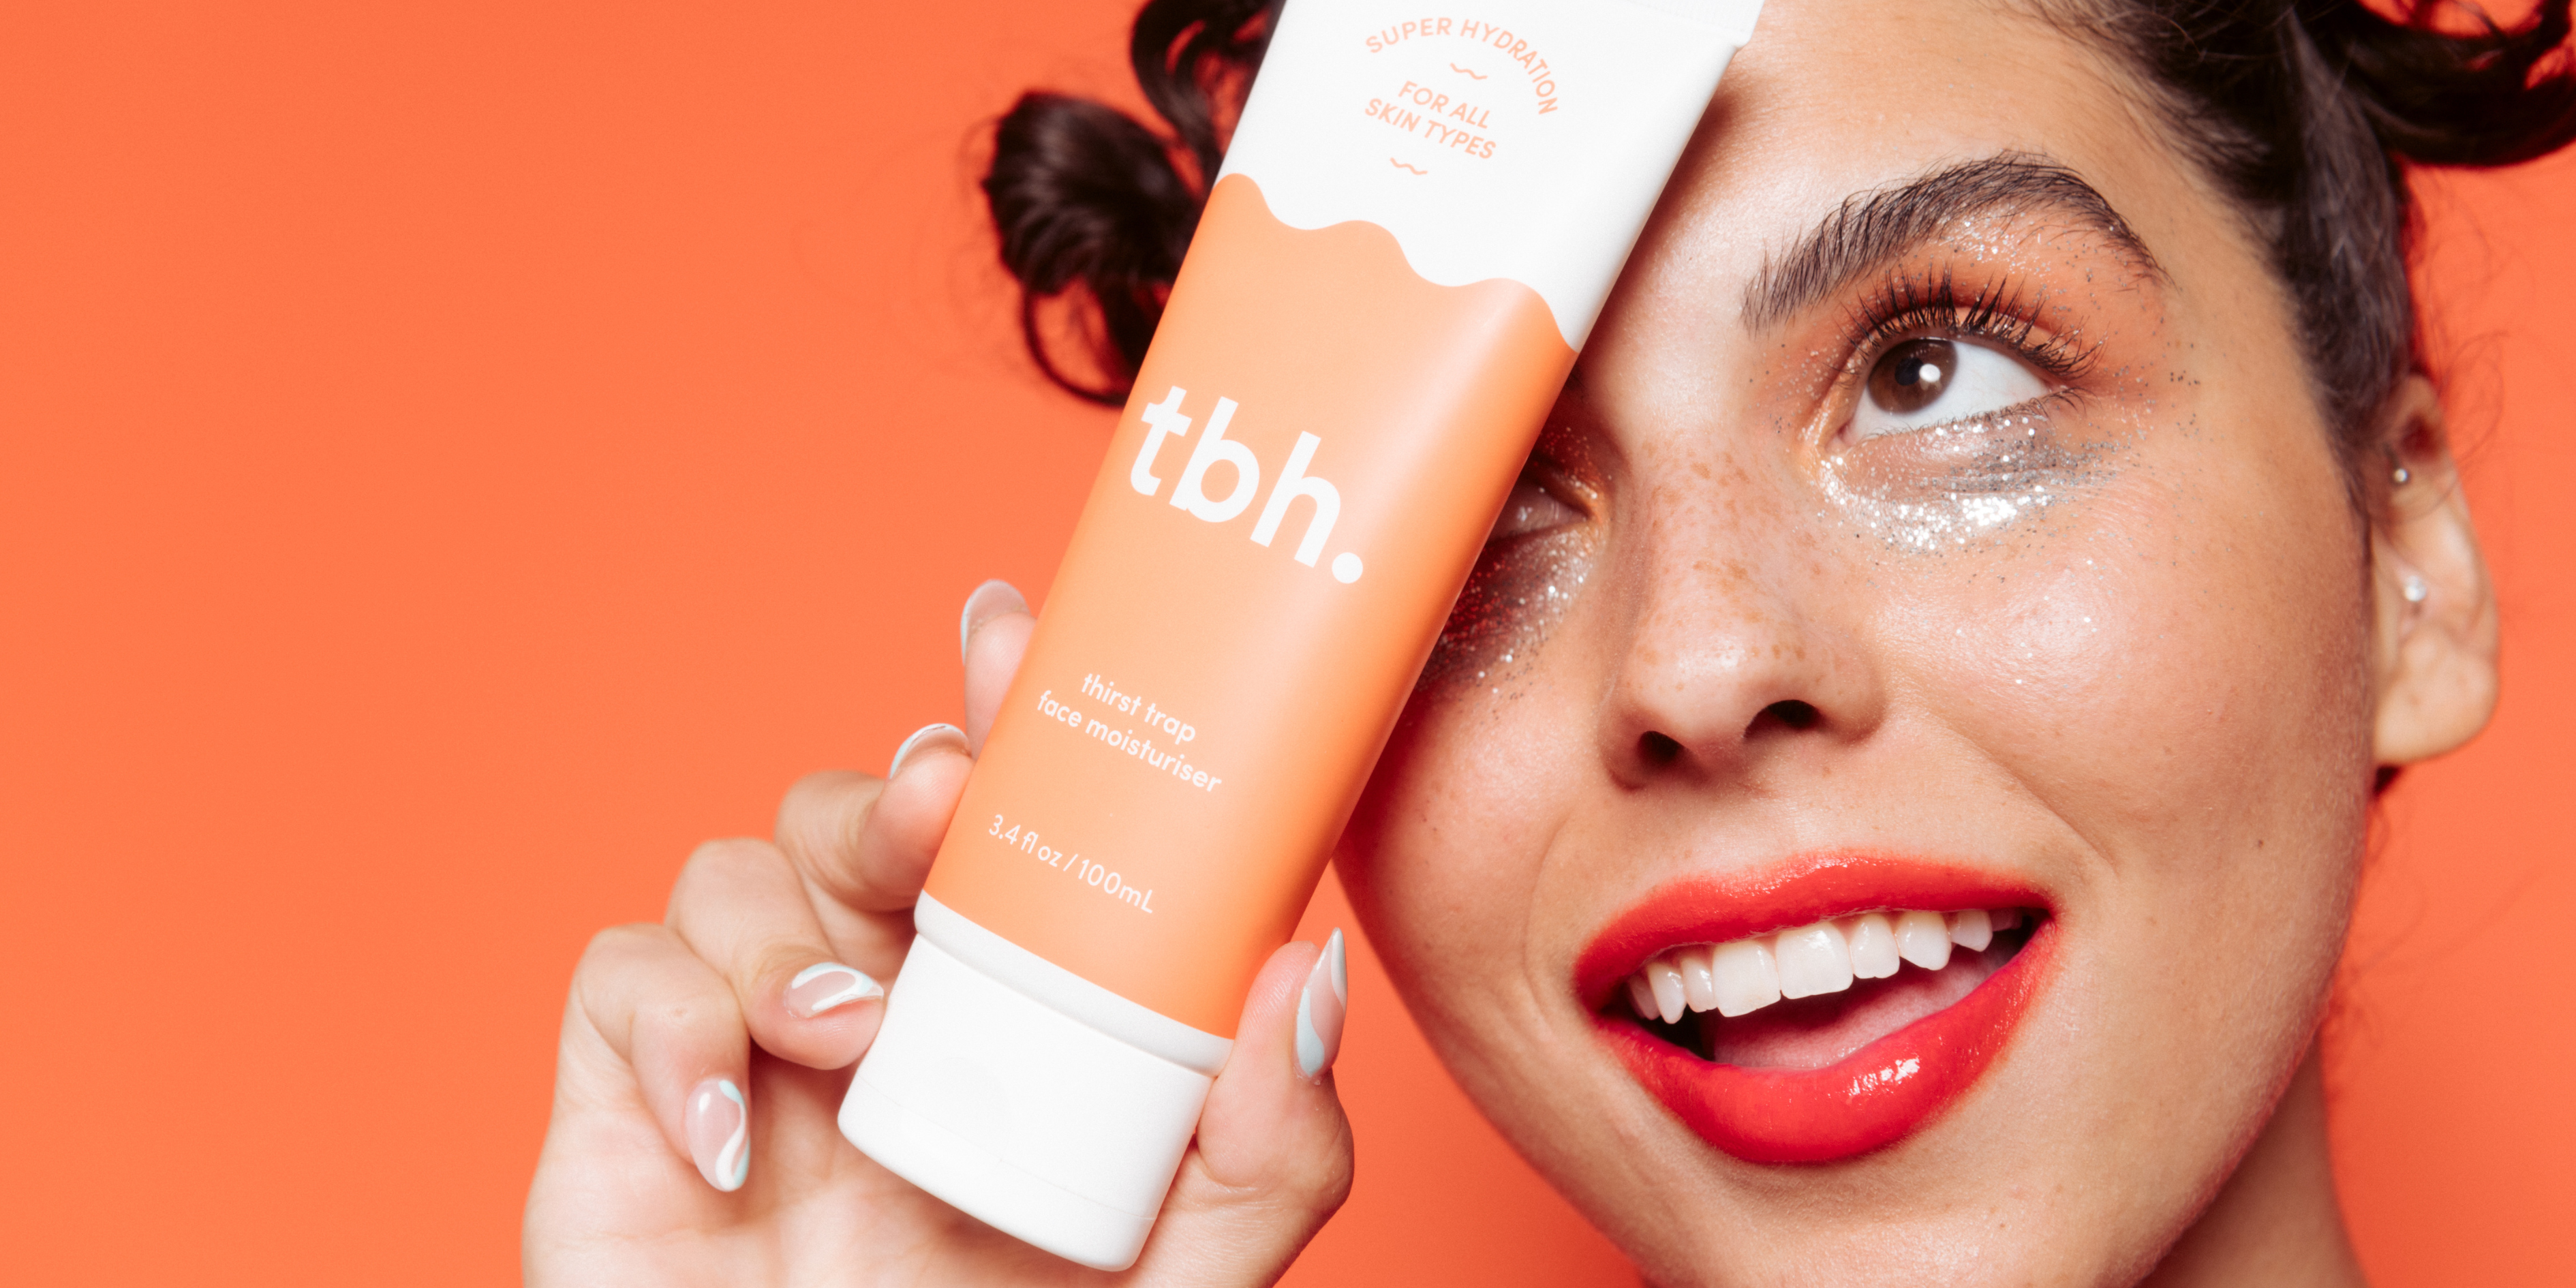 Orange background, girl with pink eyeshadow and glitter under her eyes, red lipstick smiling and lookinbg up with tbh skincare thirst trap moisturiser. Dry skin ingredients